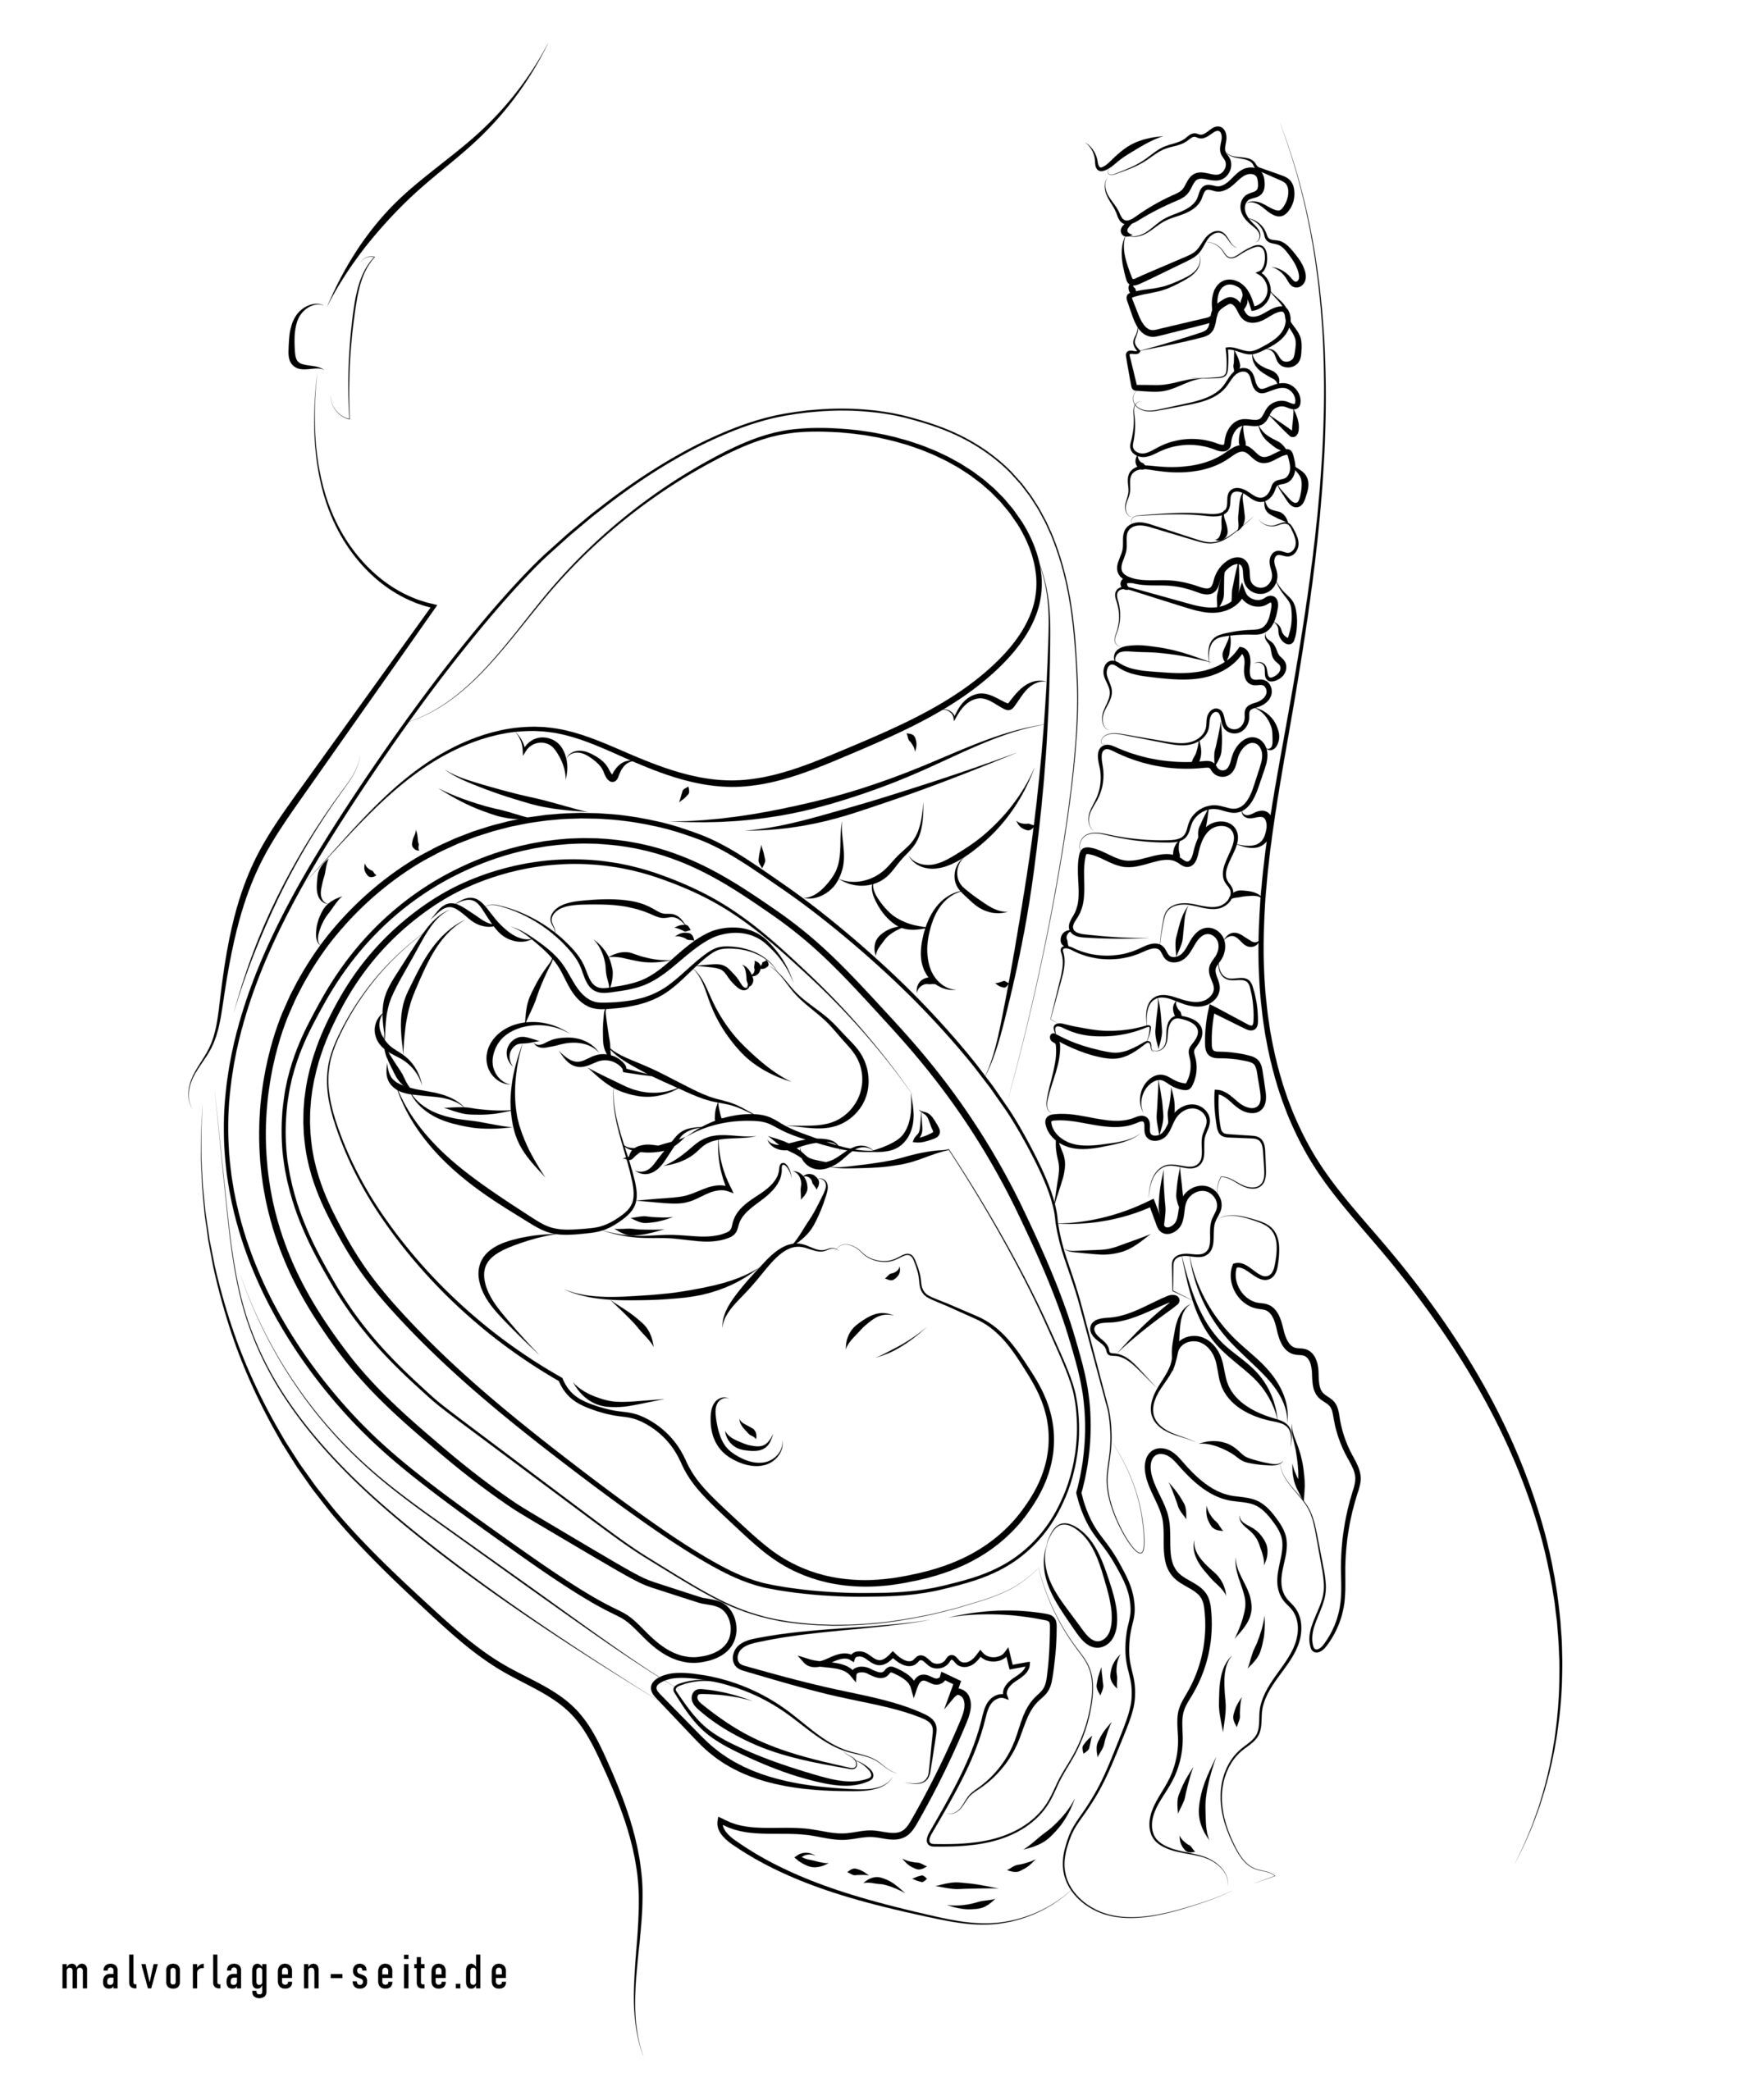 Coloring page pregnancy baby in the womb - free coloring pages